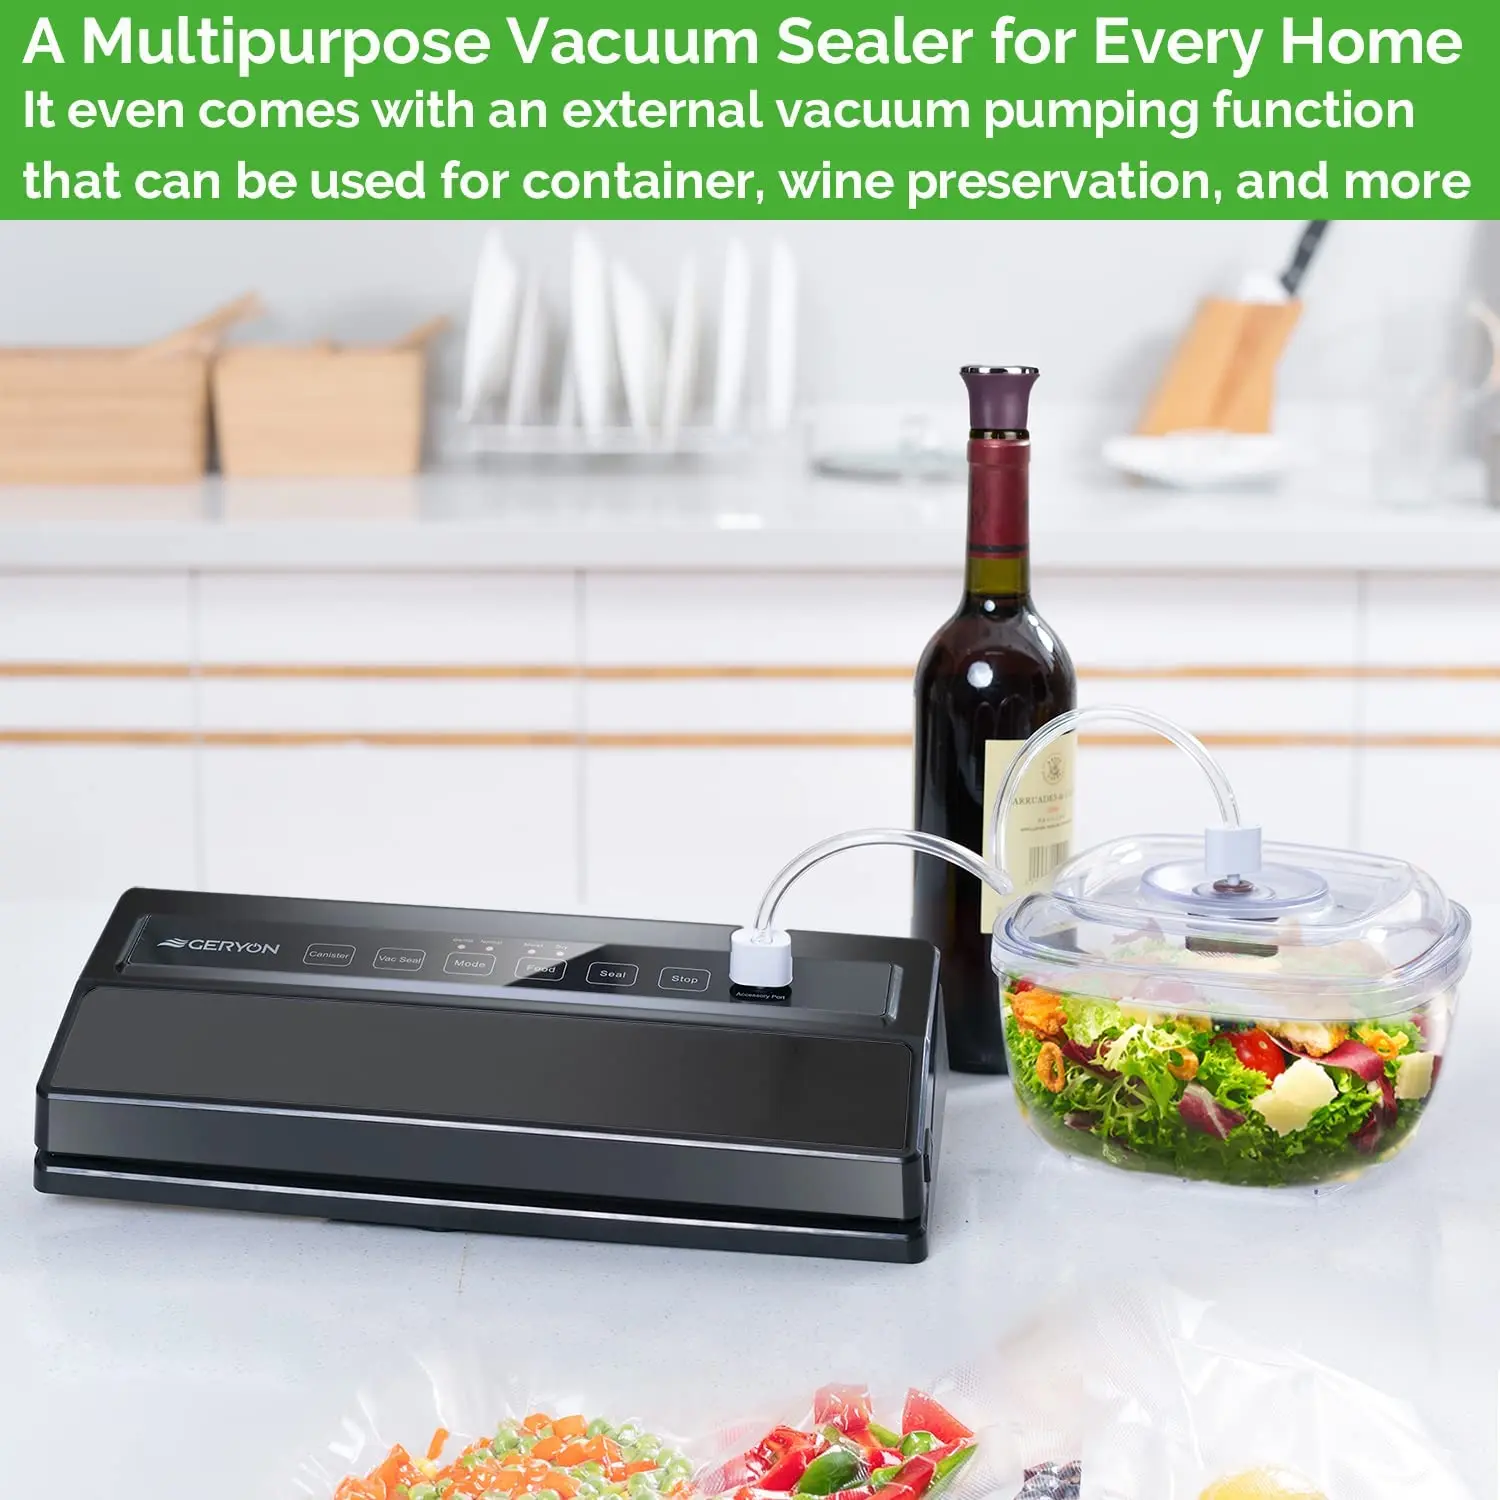 https://ae01.alicdn.com/kf/Sec17c31a95994166b533a3ae24a8ae03v/GERYON-Black-Electric-Vacuum-Sealer-Sous-Vide-Food-Saver-With-5pcs-Free-Bags-Automatic-Commercial-Household.jpg